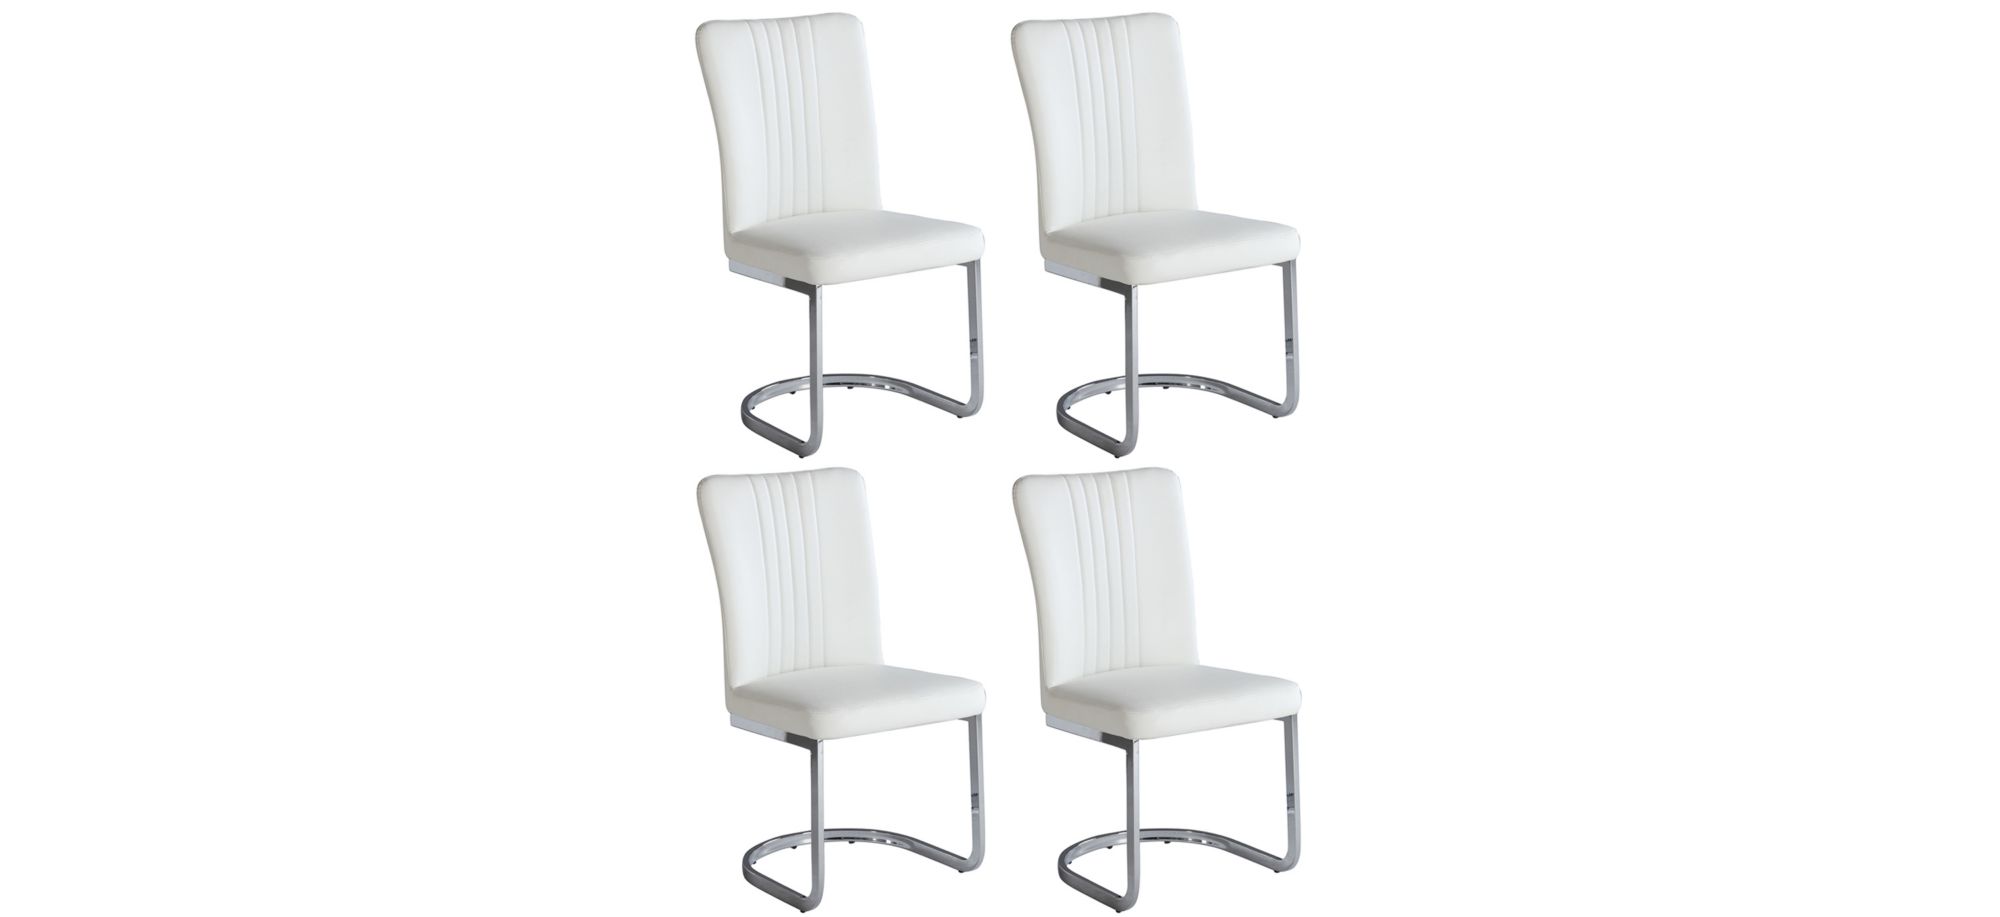 Fairchild Dining Chairs - Set of 4 in White by Chintaly Imports